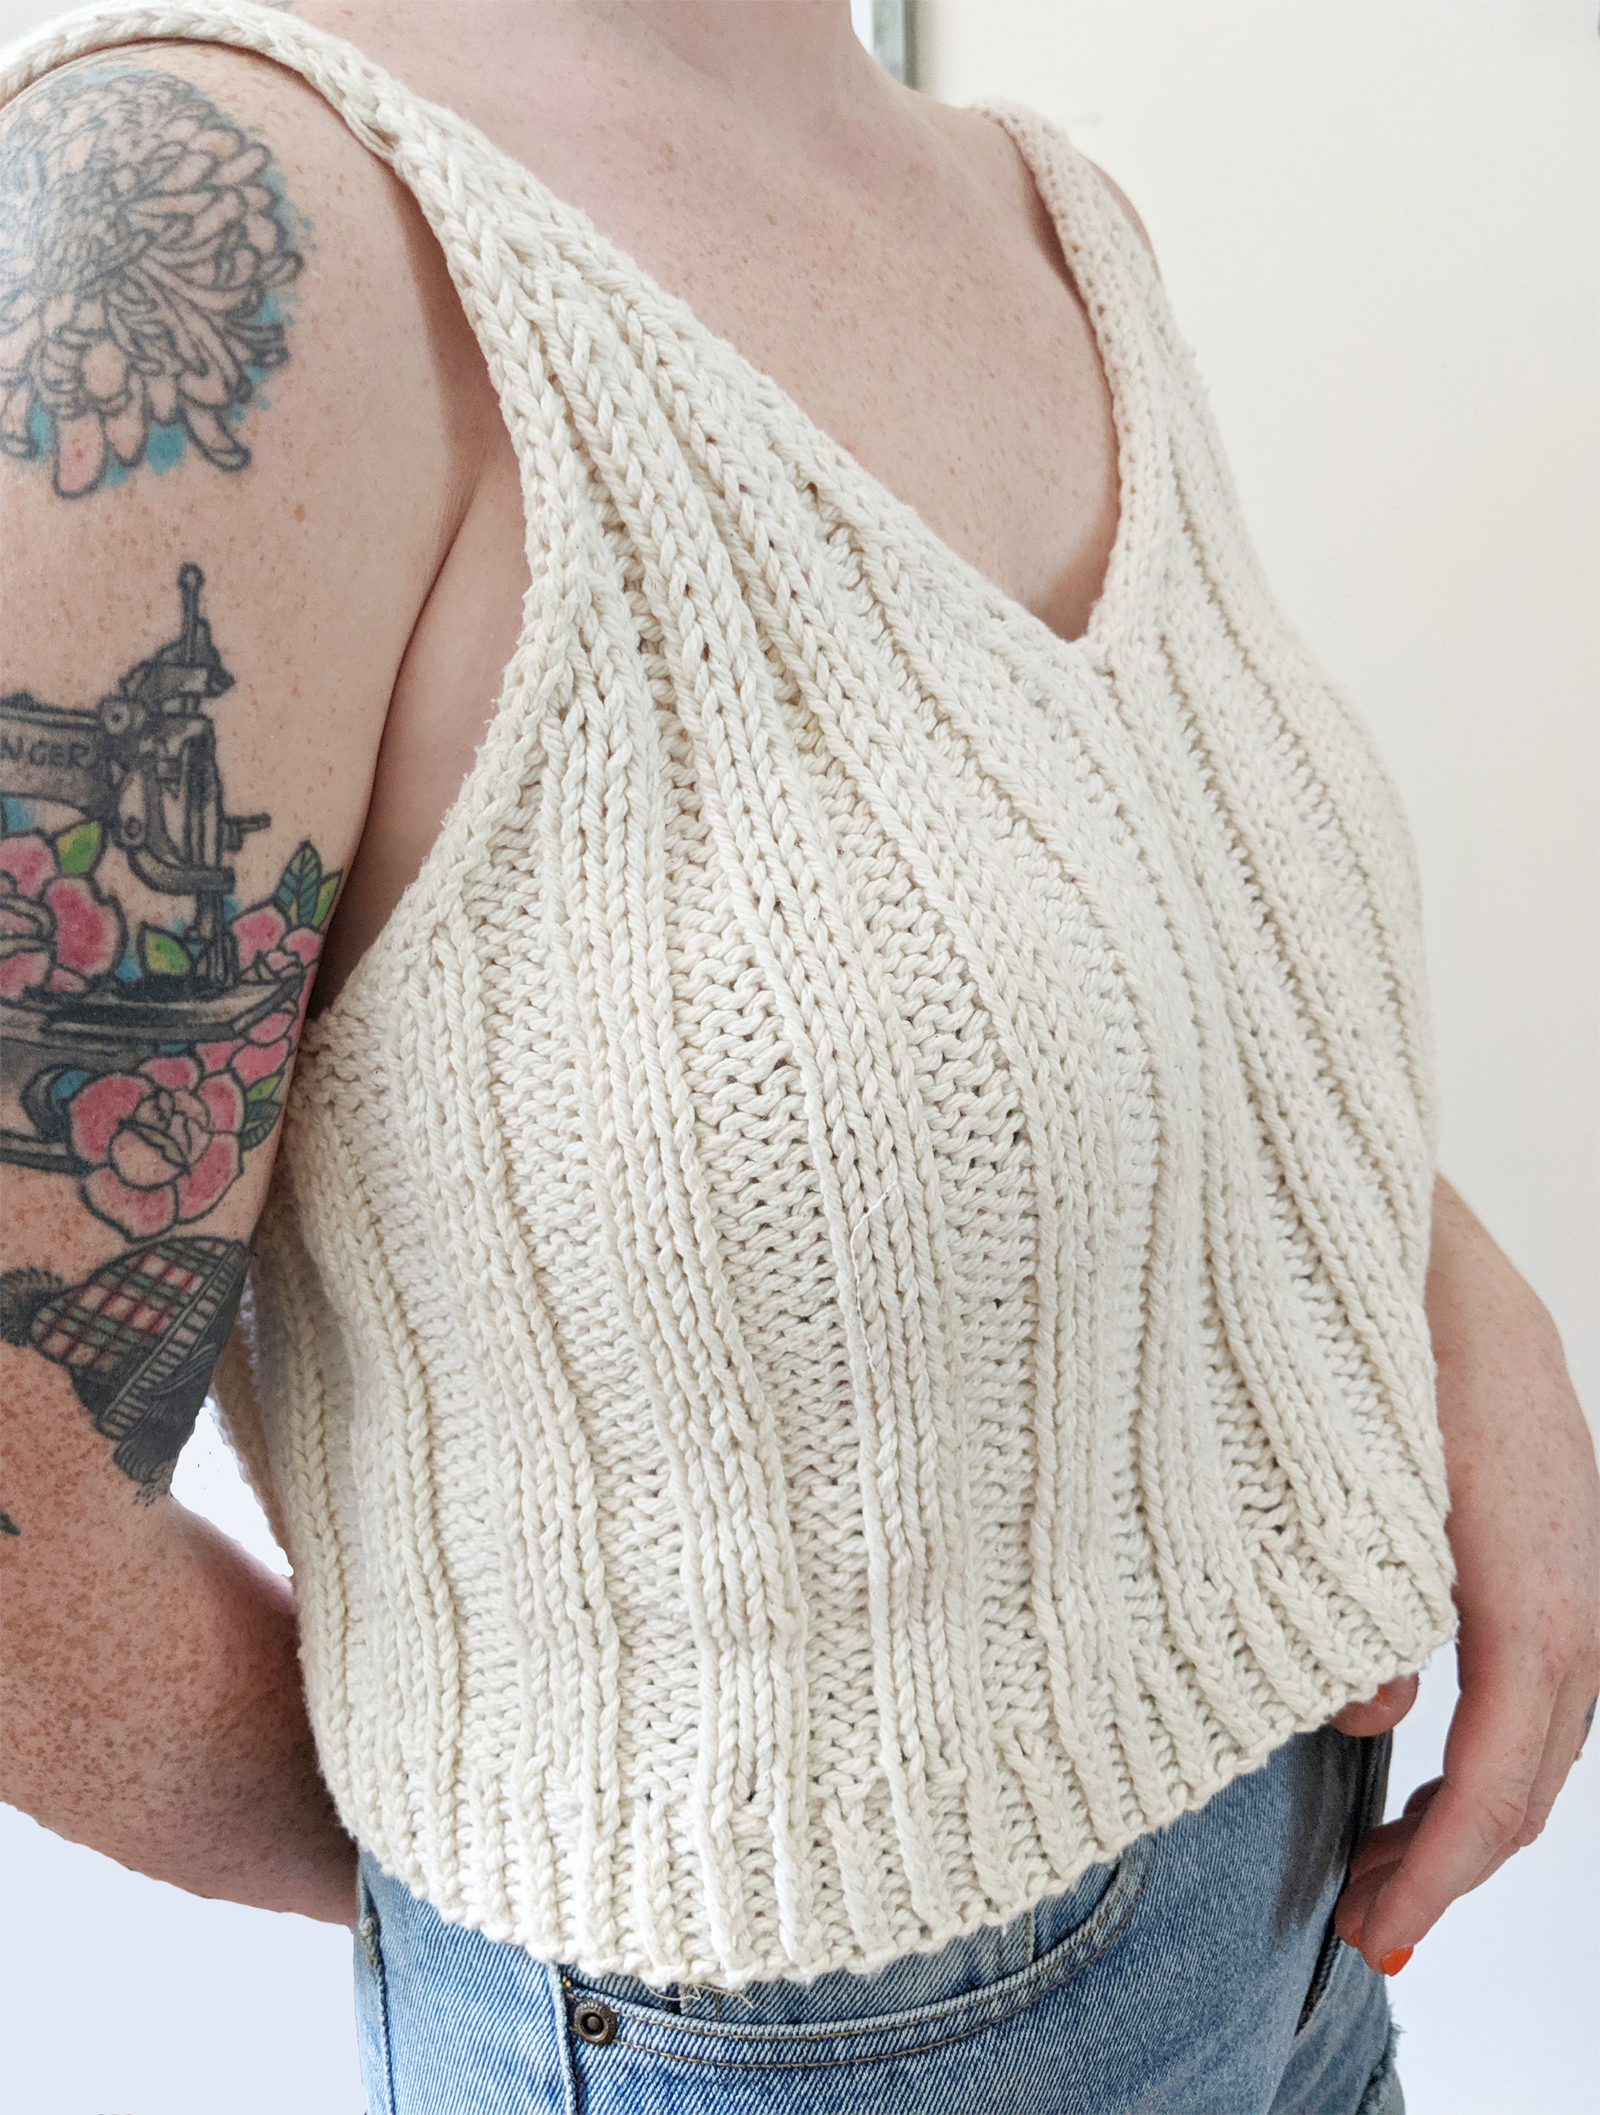 How To Adjust A Knitting Pattern To Work For You Katie